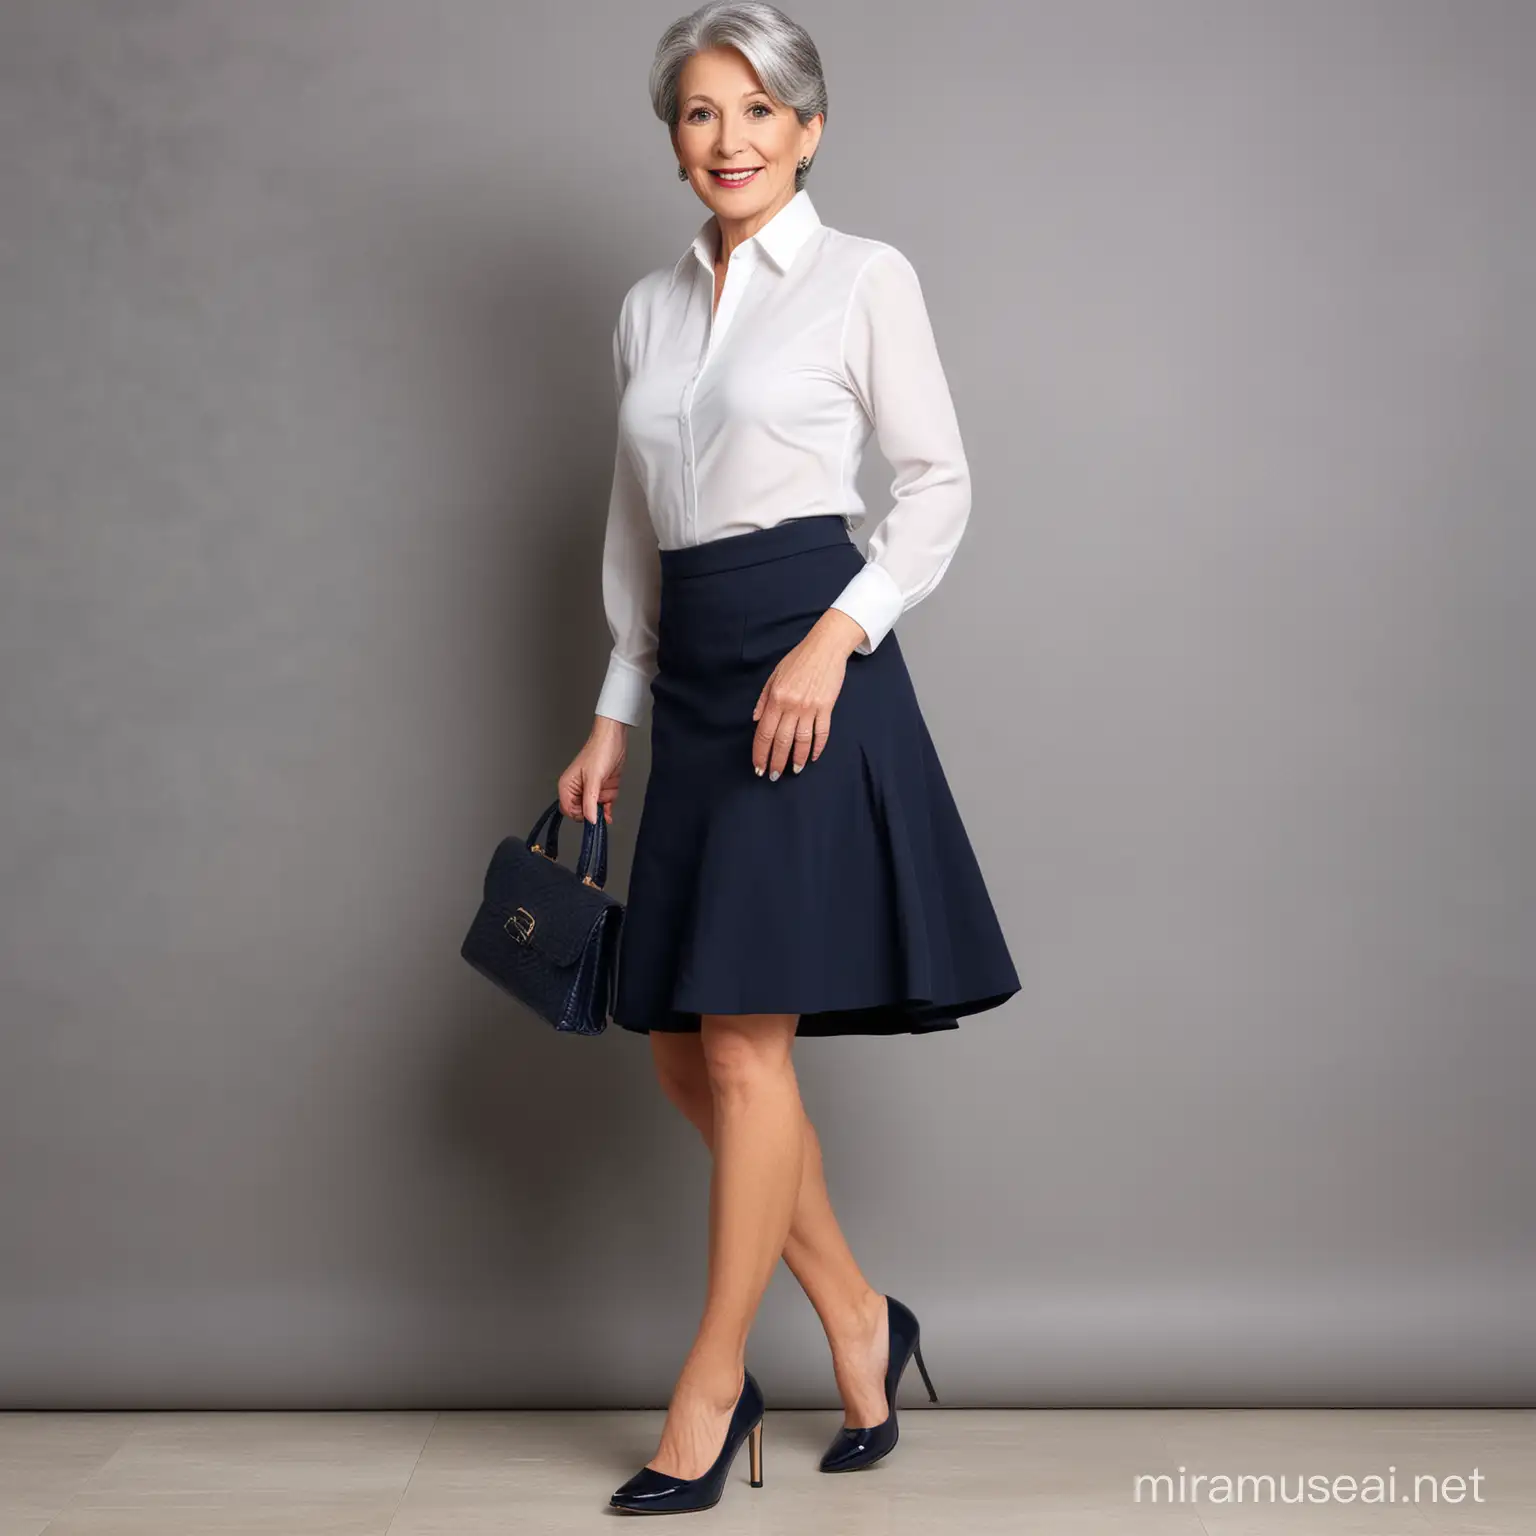 One mature grey hair woman. She is wearing an above the knee navy blue skirt, white blouse, and high heel pumps
